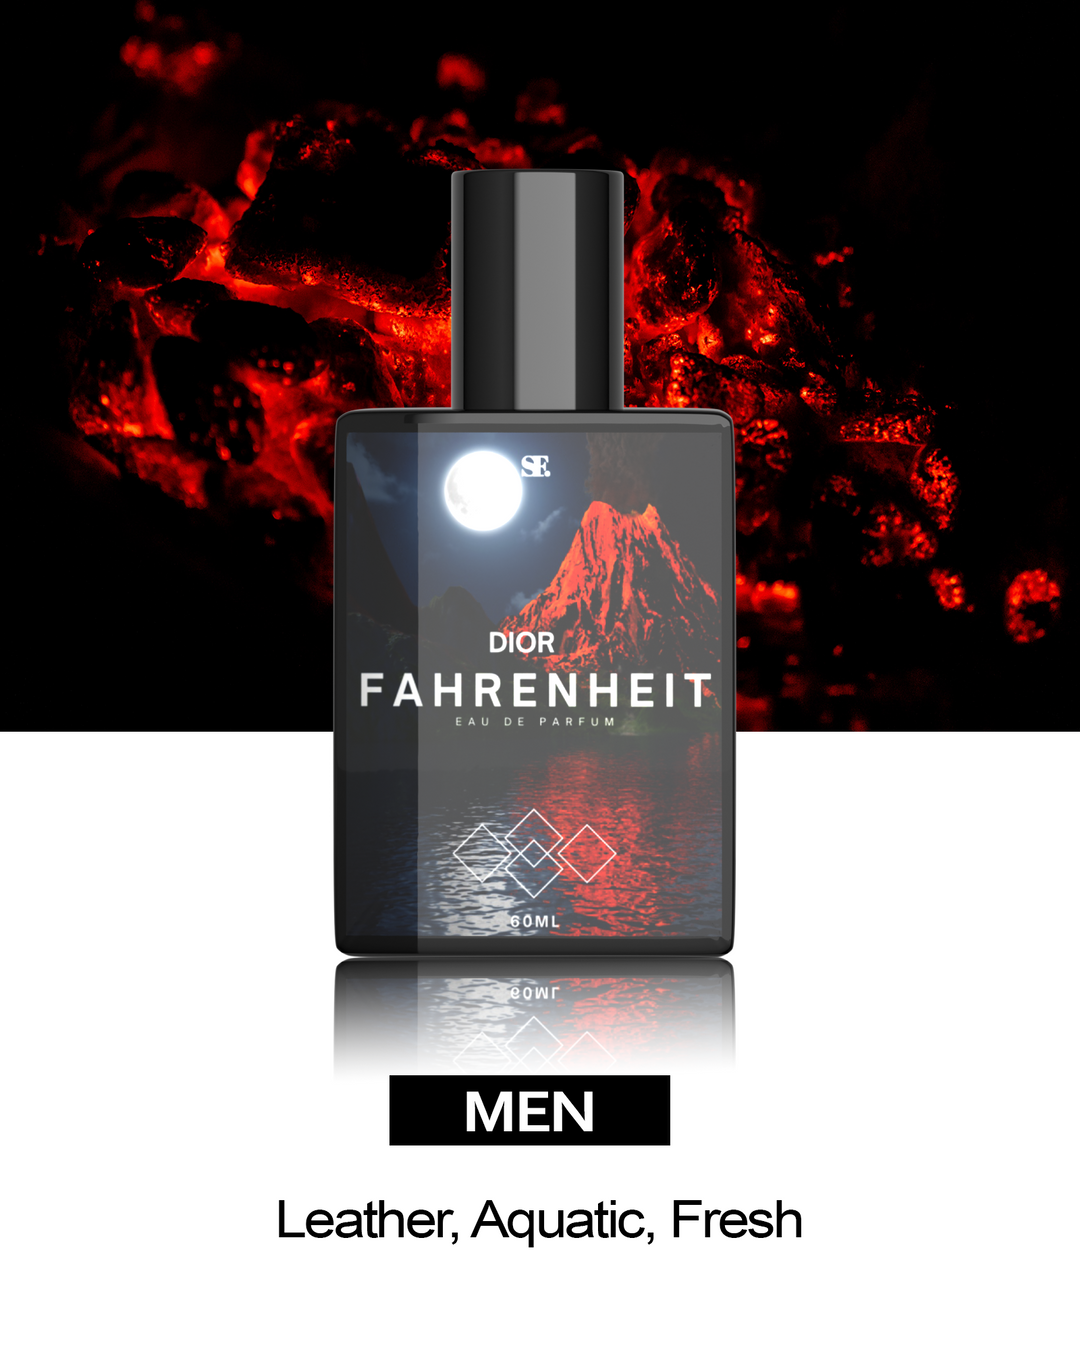 Inspired by Fahrenheit